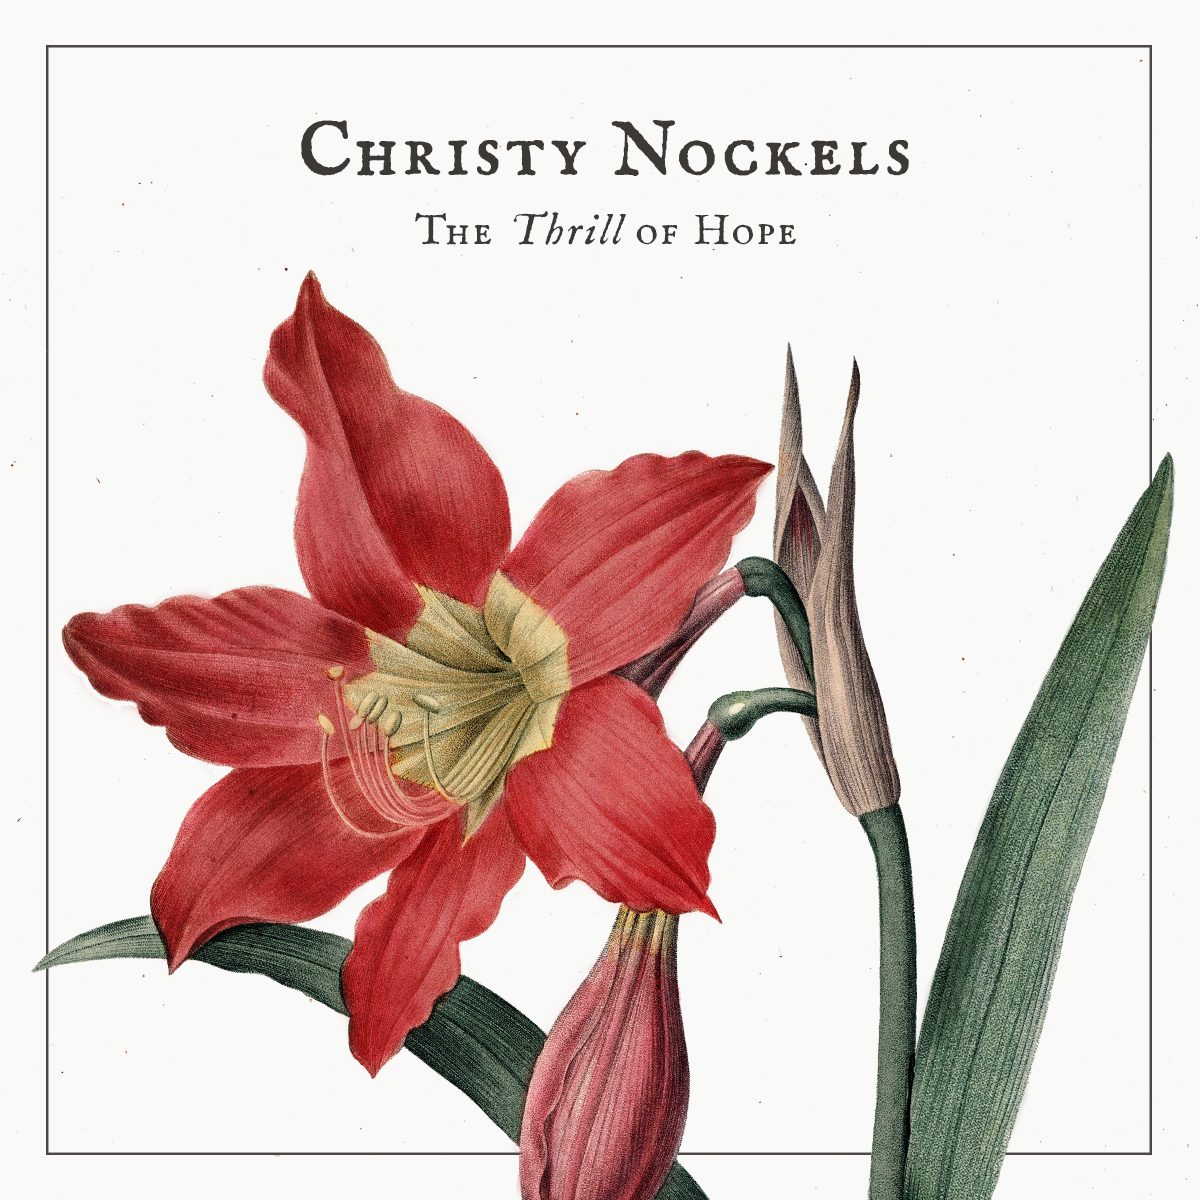 The amaryllis flower: The cover of “The Thrill of Hope”, the first Christmas Album from Christy Nockels.